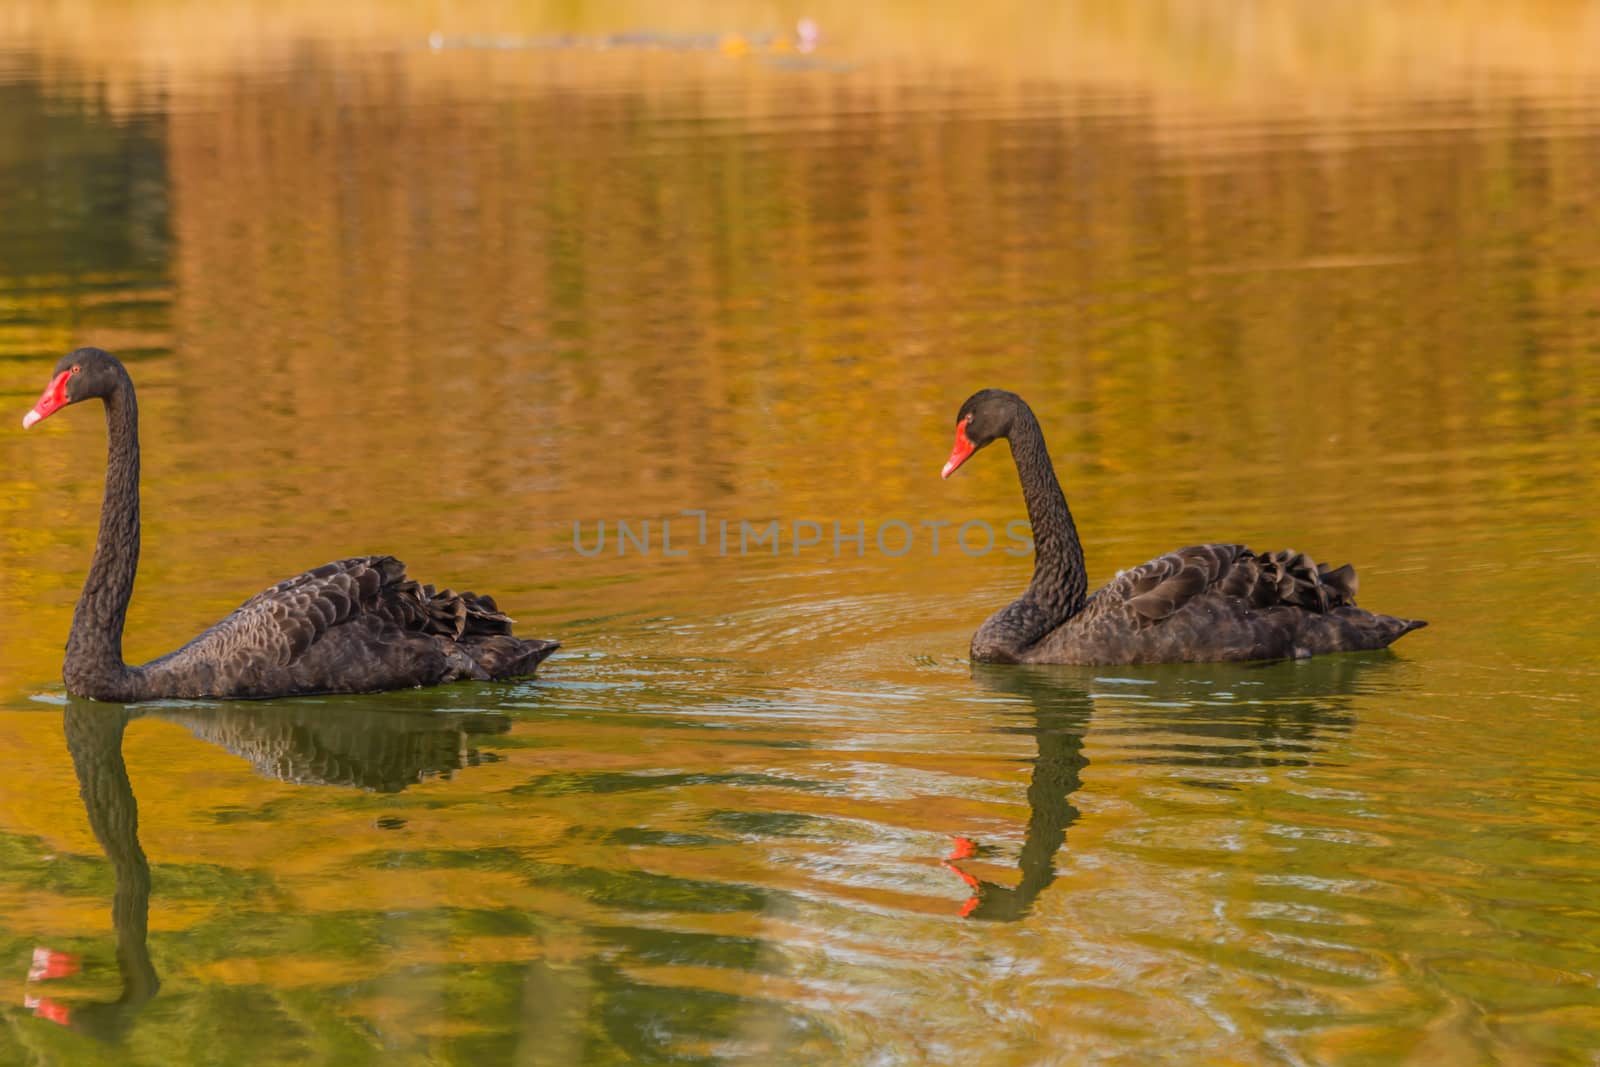 a rare exemplary of black swan exsisting in Italy by grancanaria